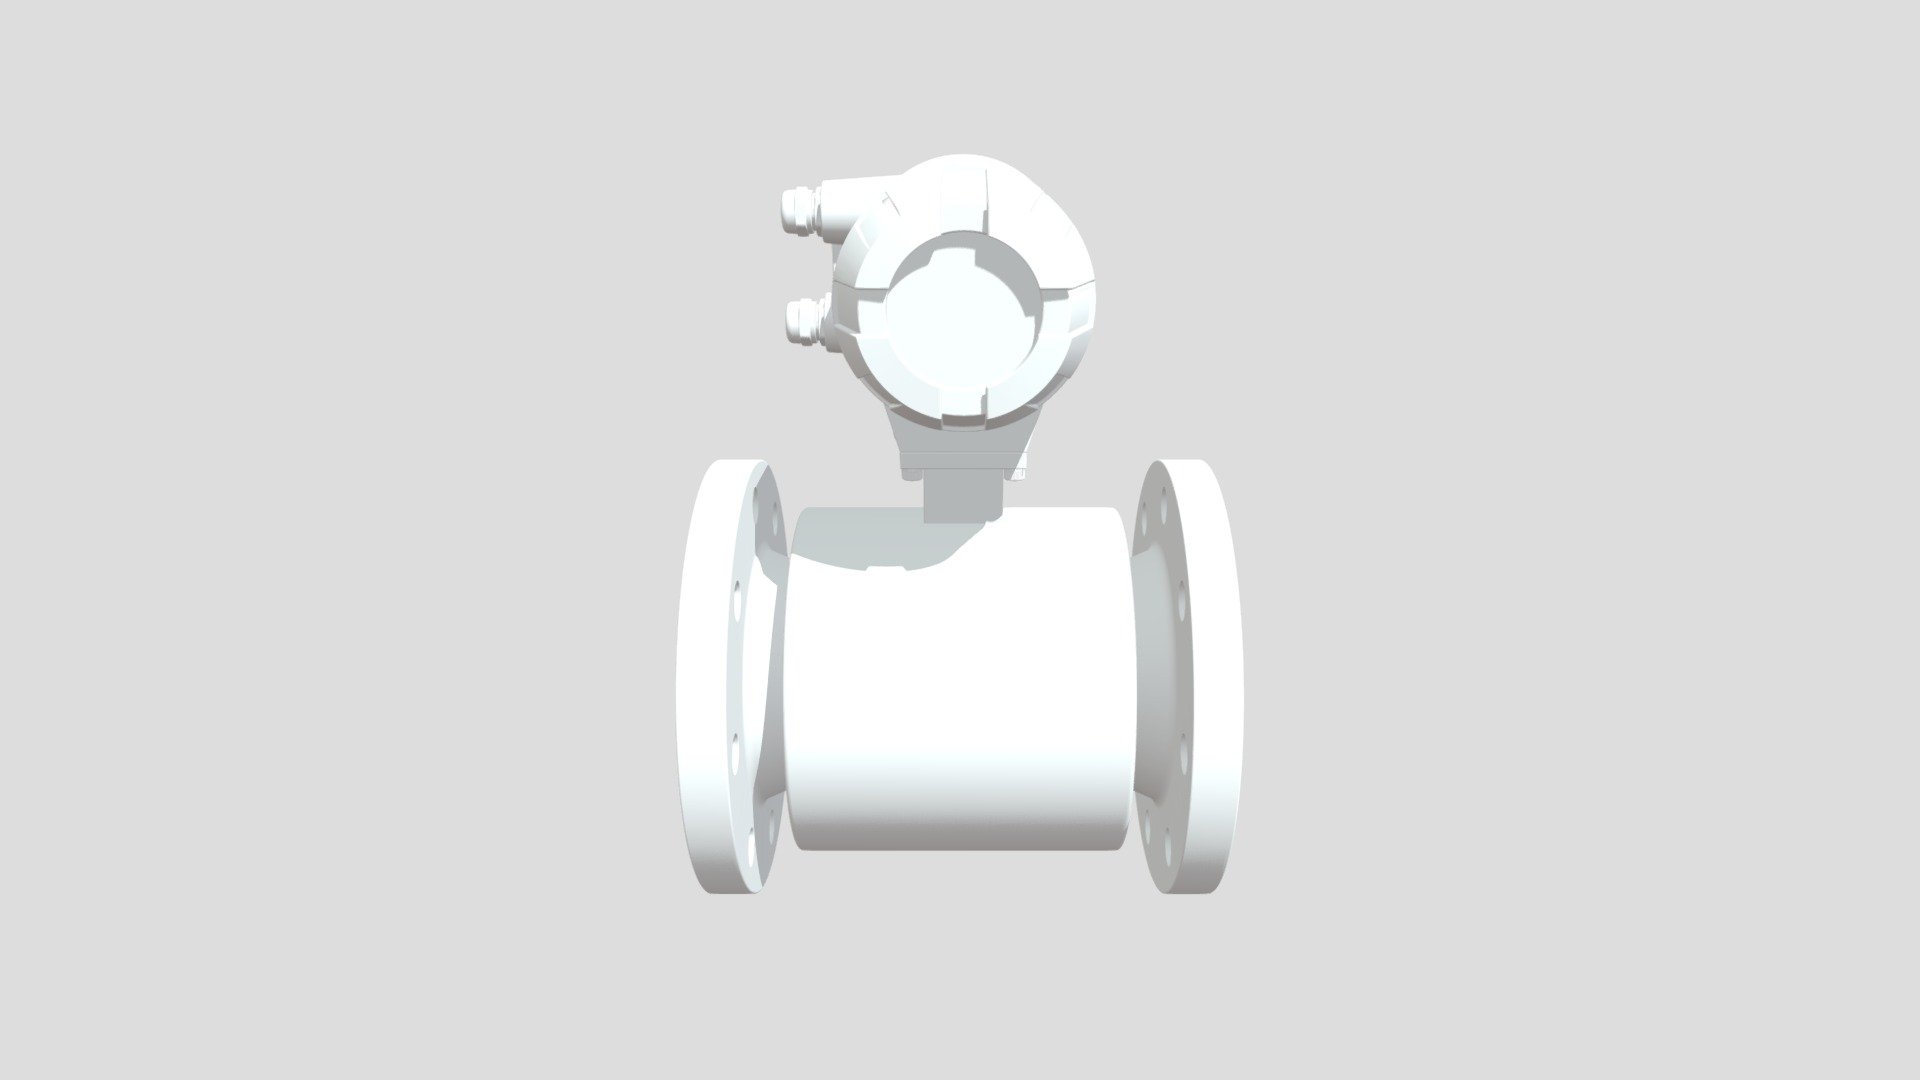 DOWESTON INC.'s FTE-1600 series of standard intelligent electromagnetic flowmeters are designed using Faraday's electromagnetic induction principle. They are used for water flow measurement, with wide range ratio and no pressure loss 3d model